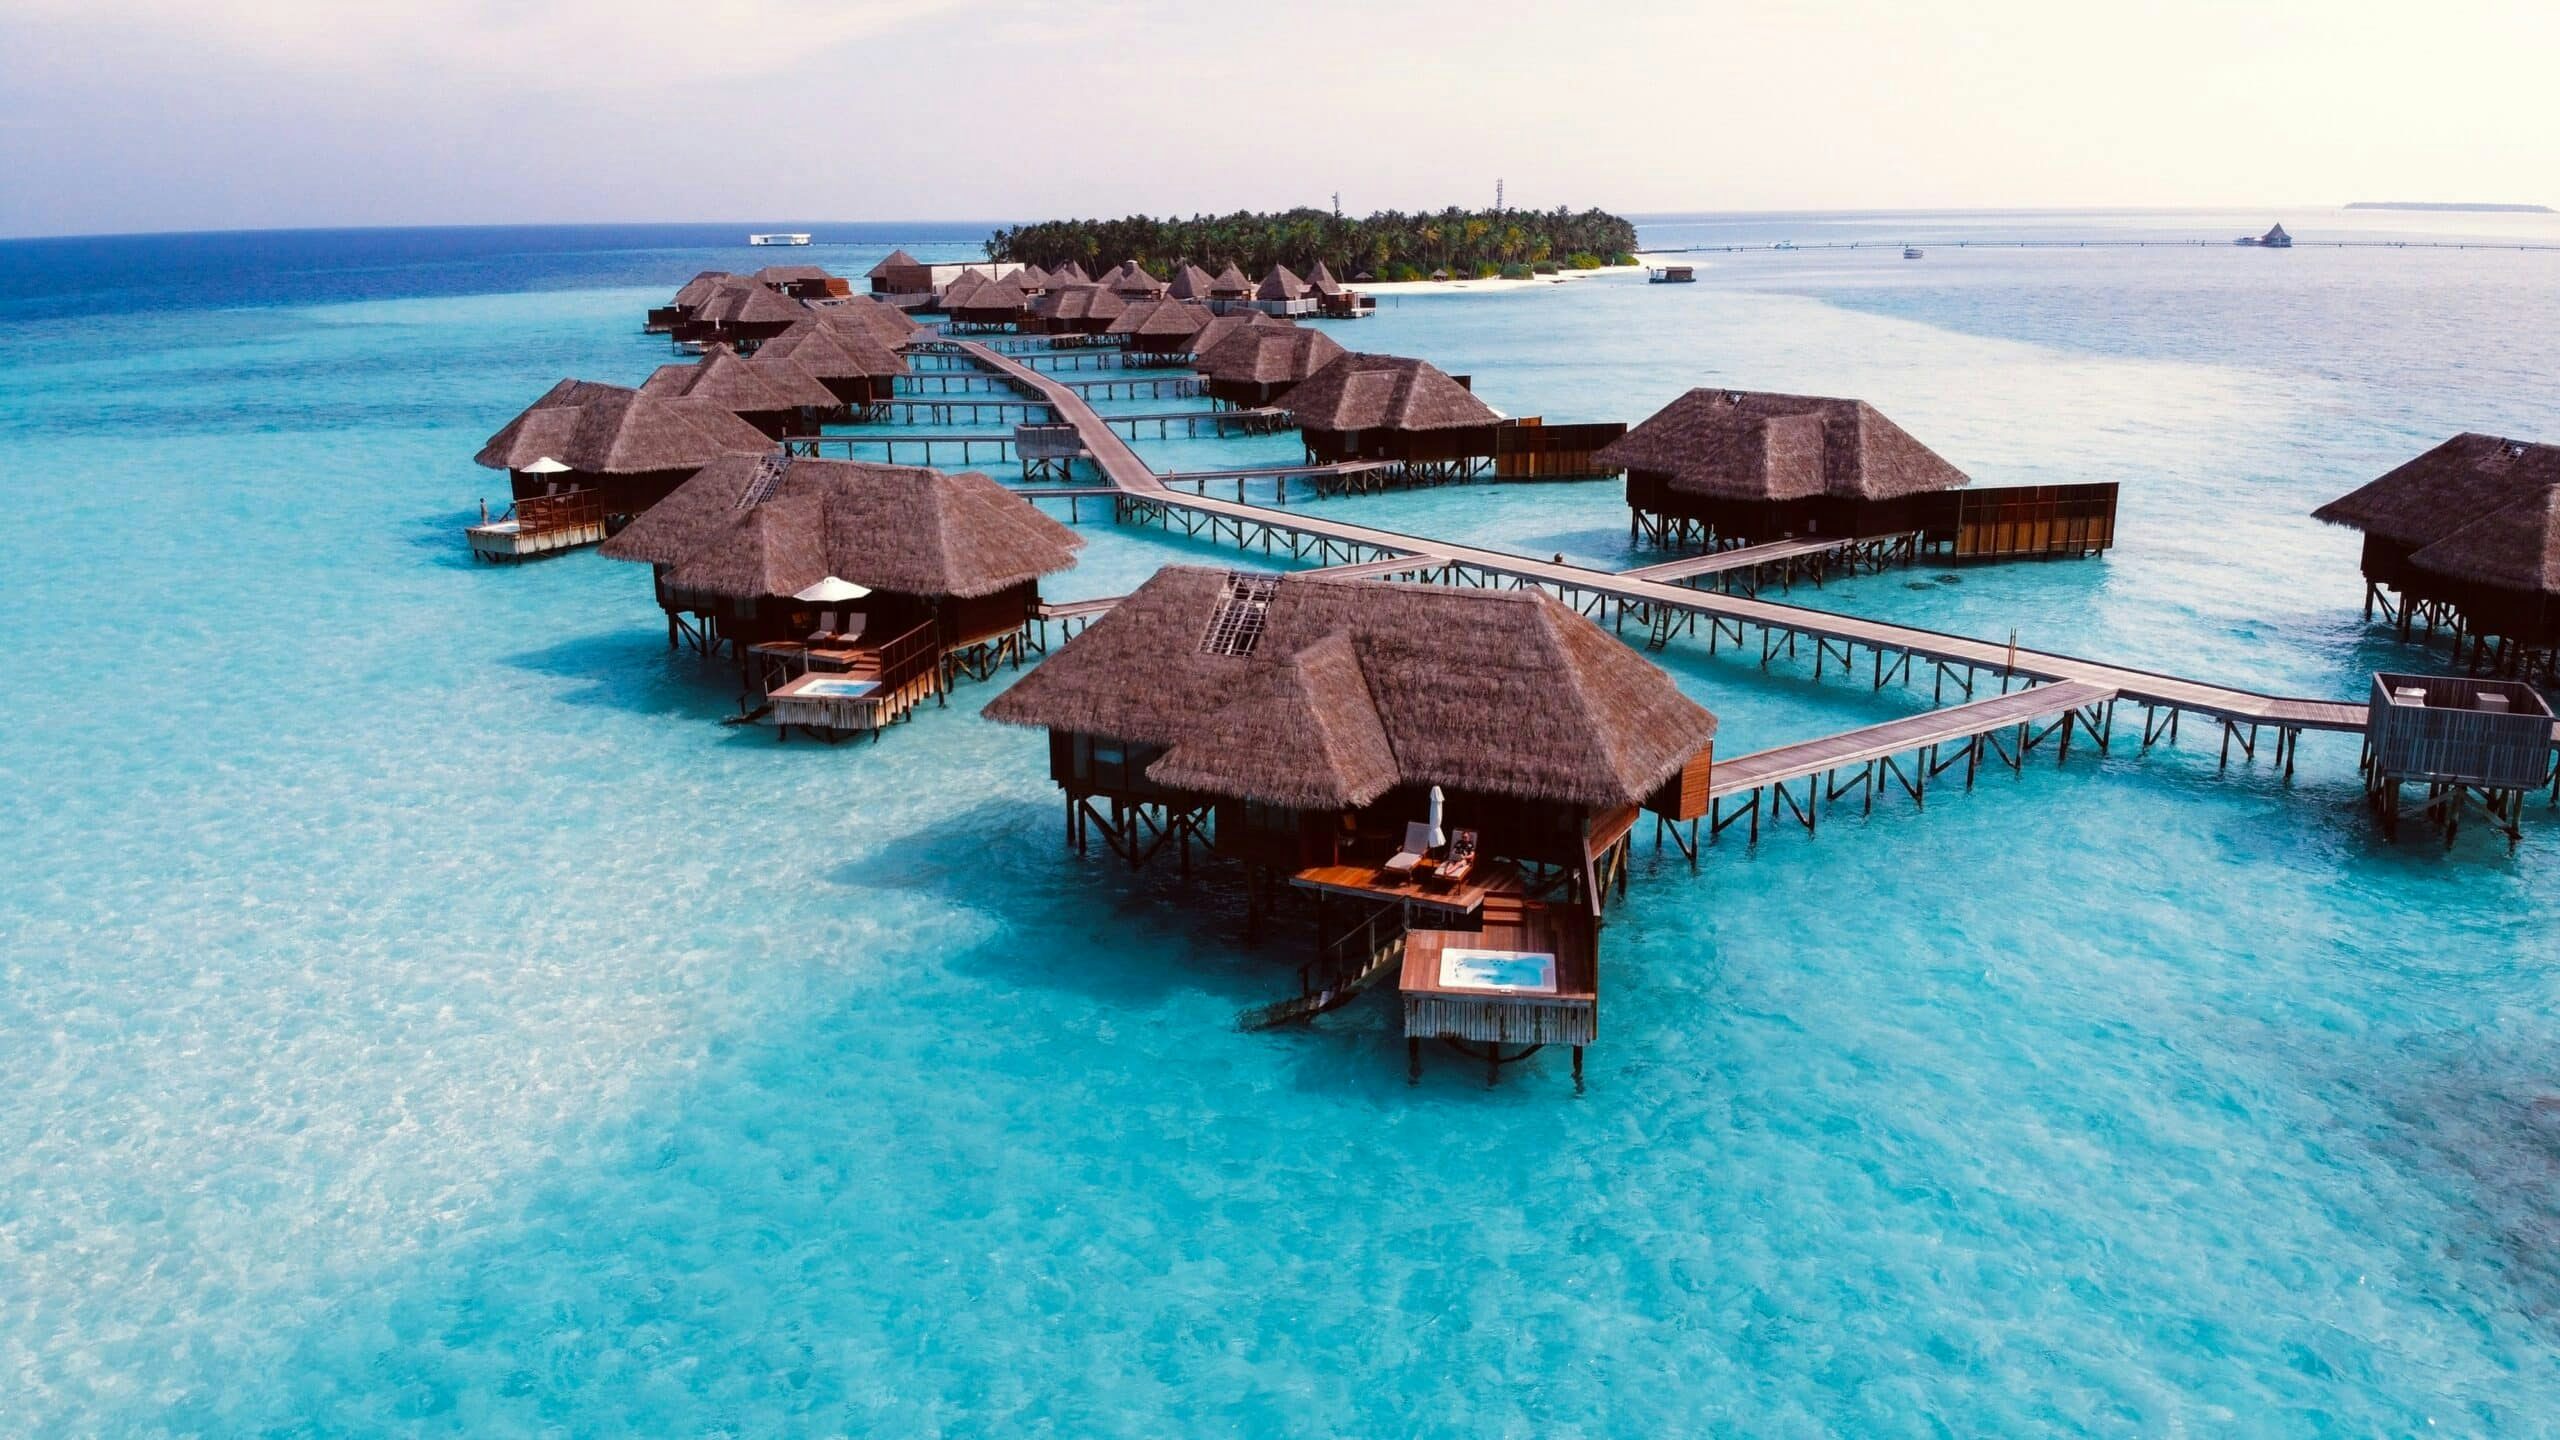 A Week’s Itinerary For A Stunning Trip To The Maldives